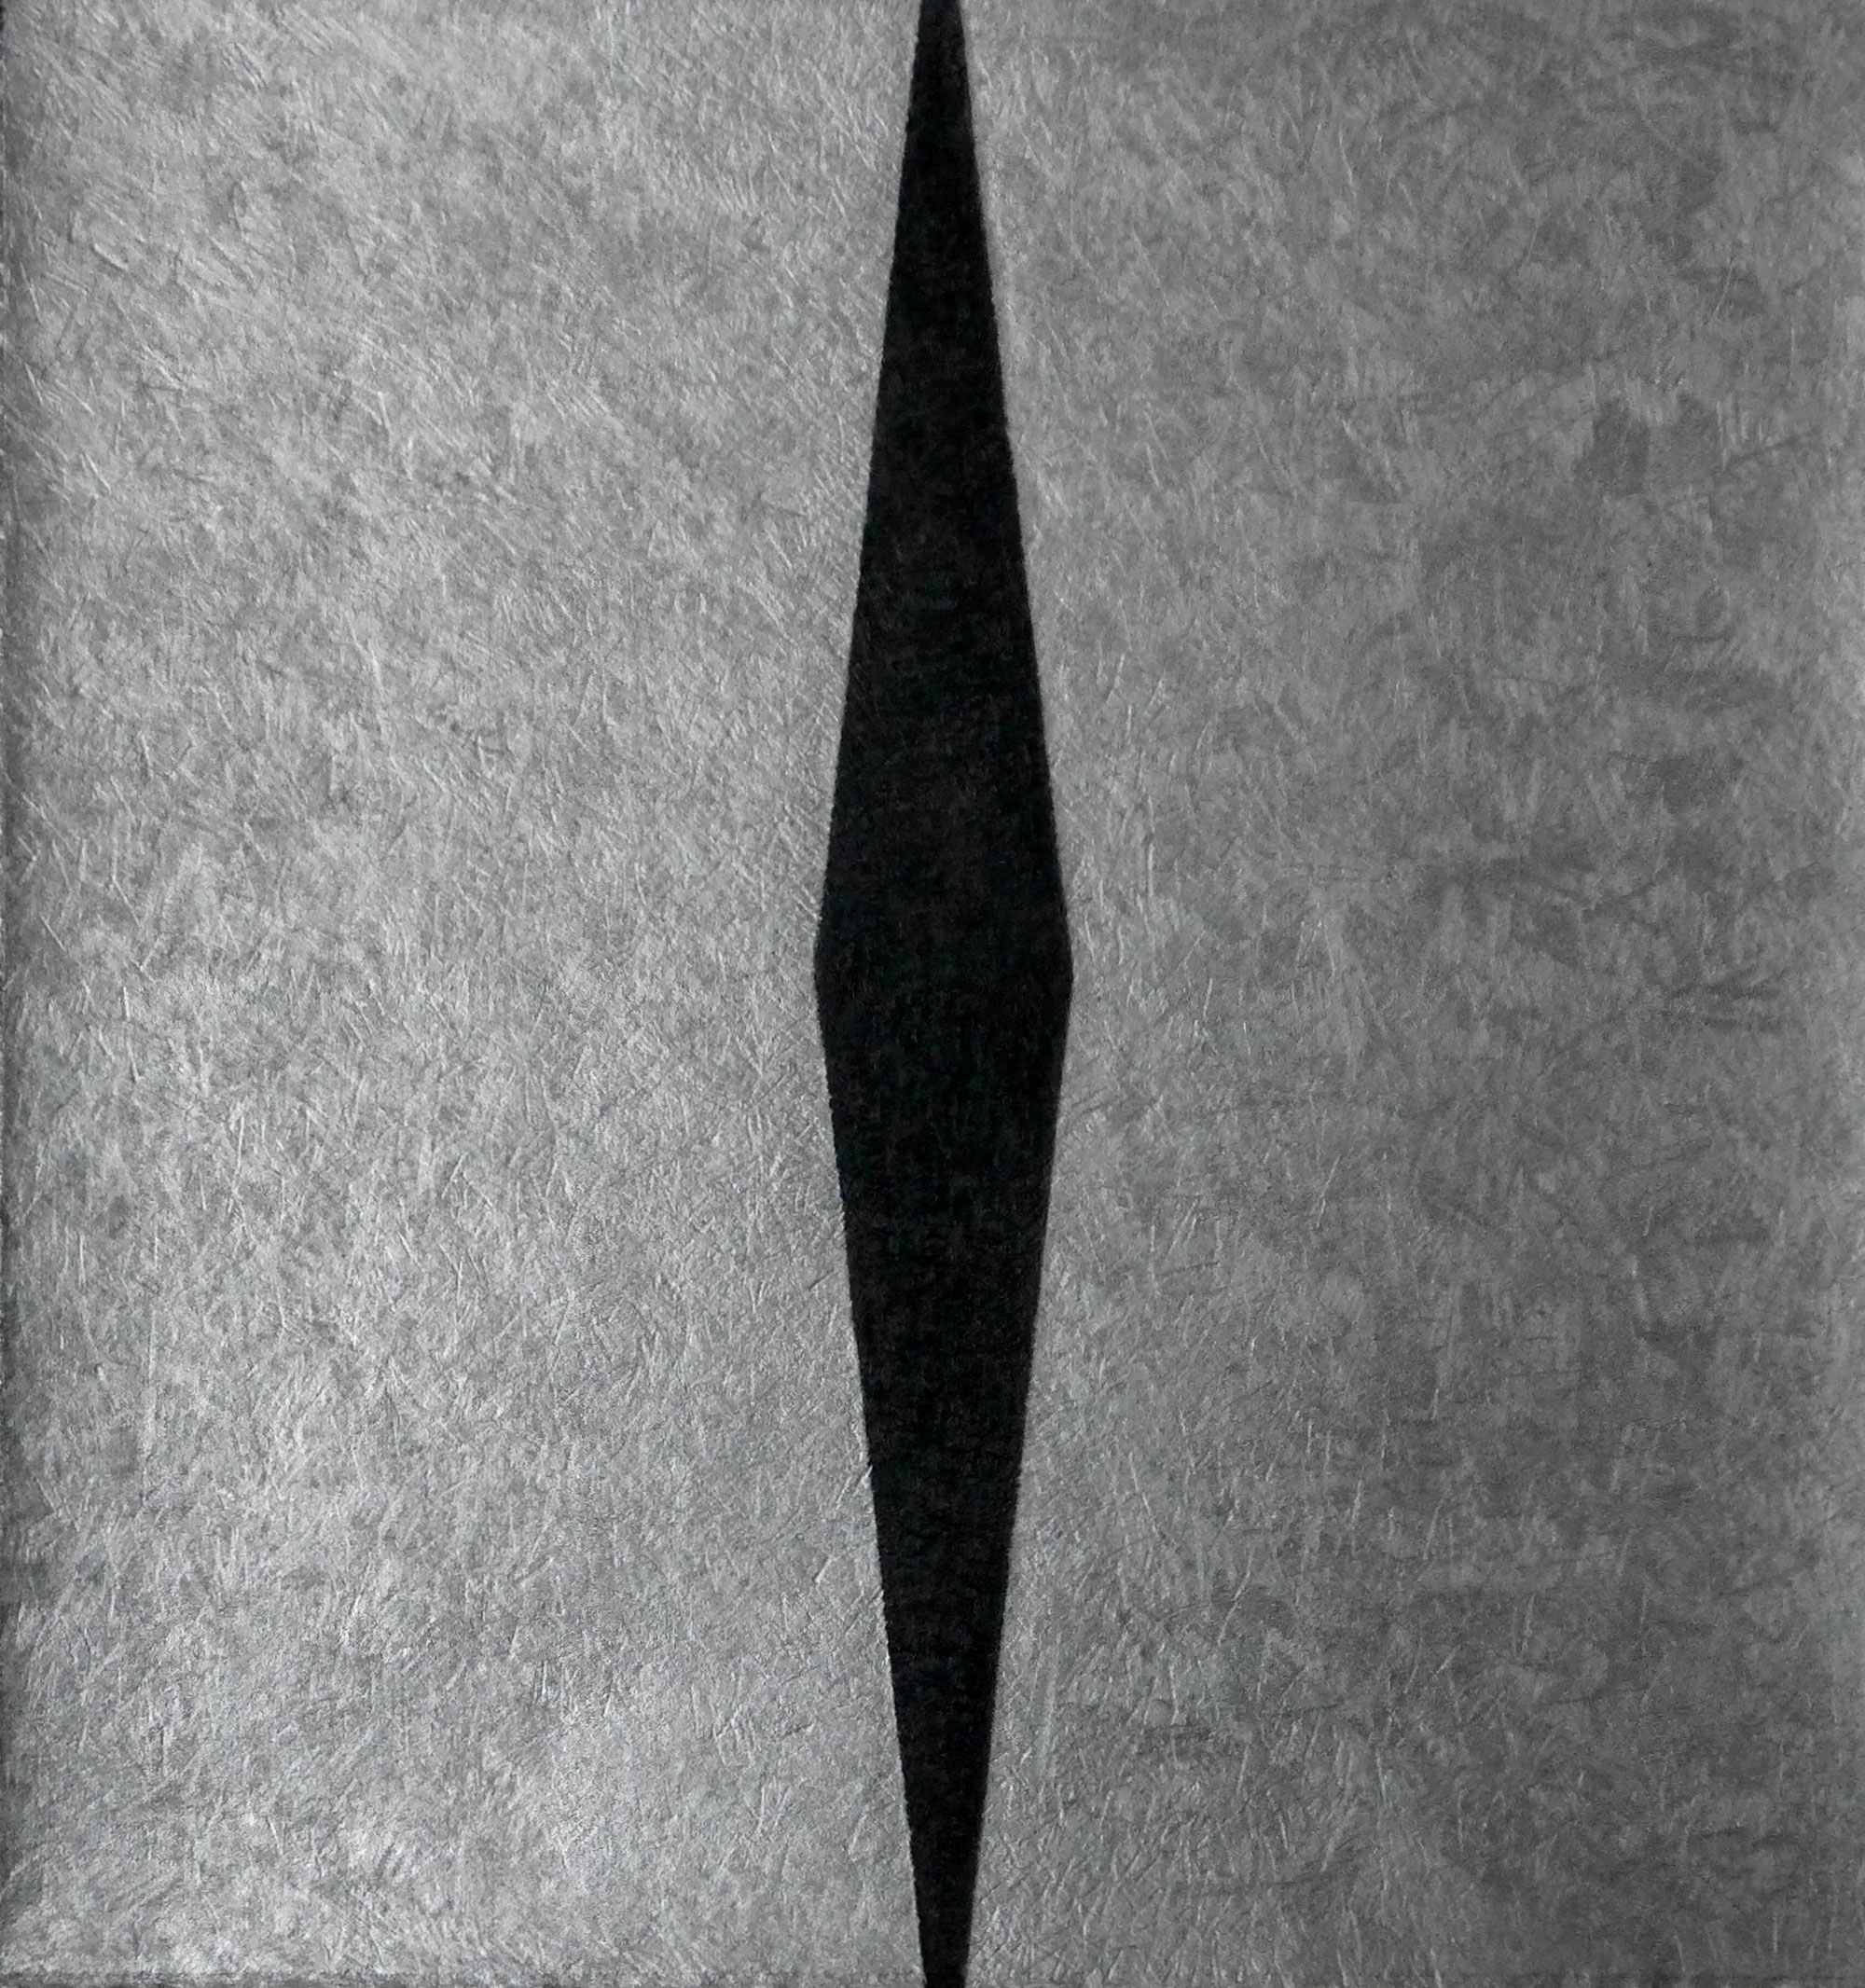 Kenneth Dingwall, Passage I (drawing), 2012, graphite on paper, 23cm x 22.5cm